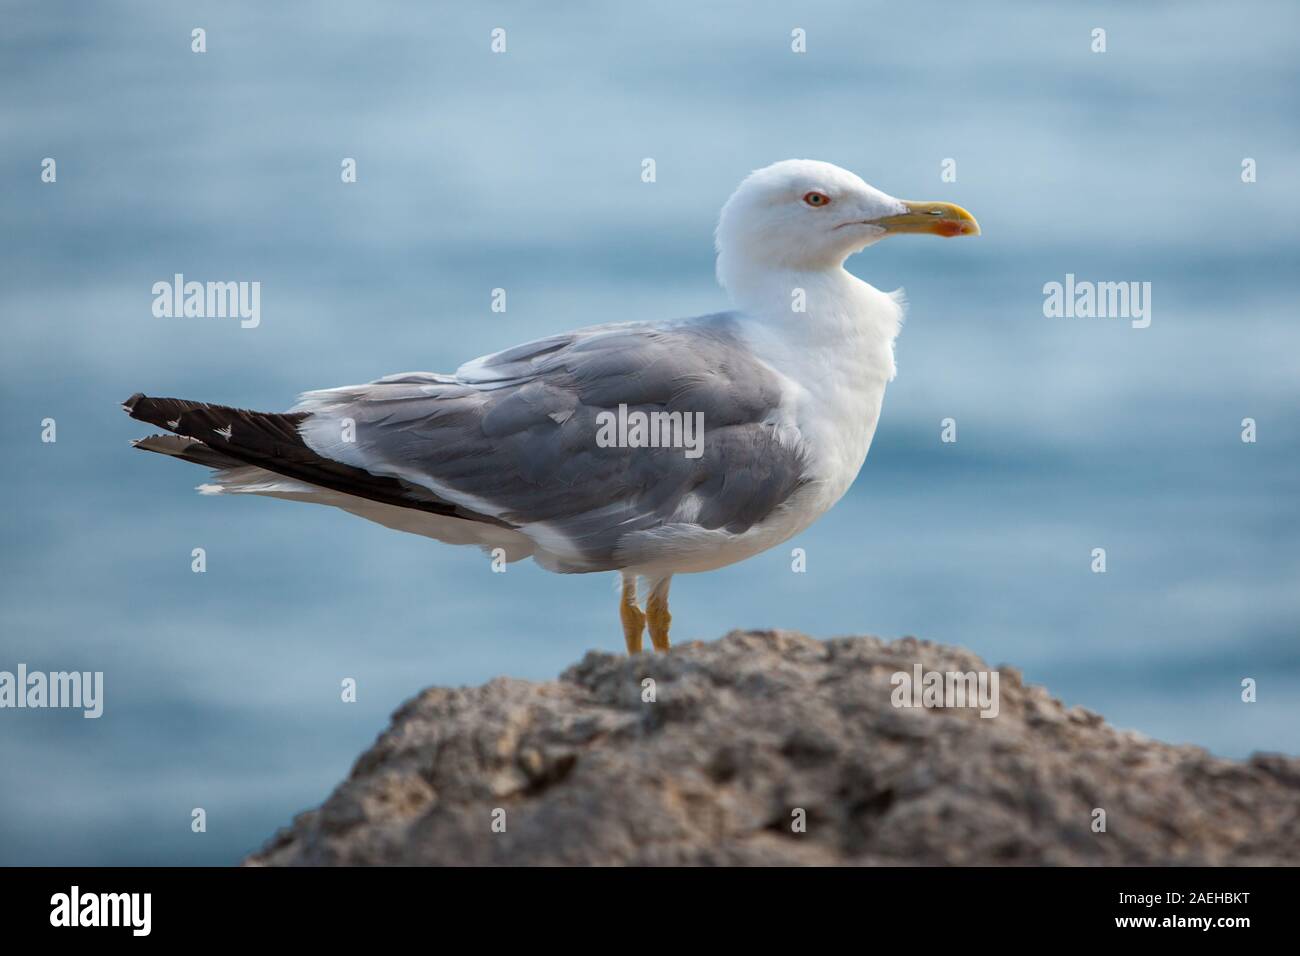 Close up view of Seagull portrait against sea shore. A white bird sitting on a rock by the beach. natural blue water background. Stock Photo